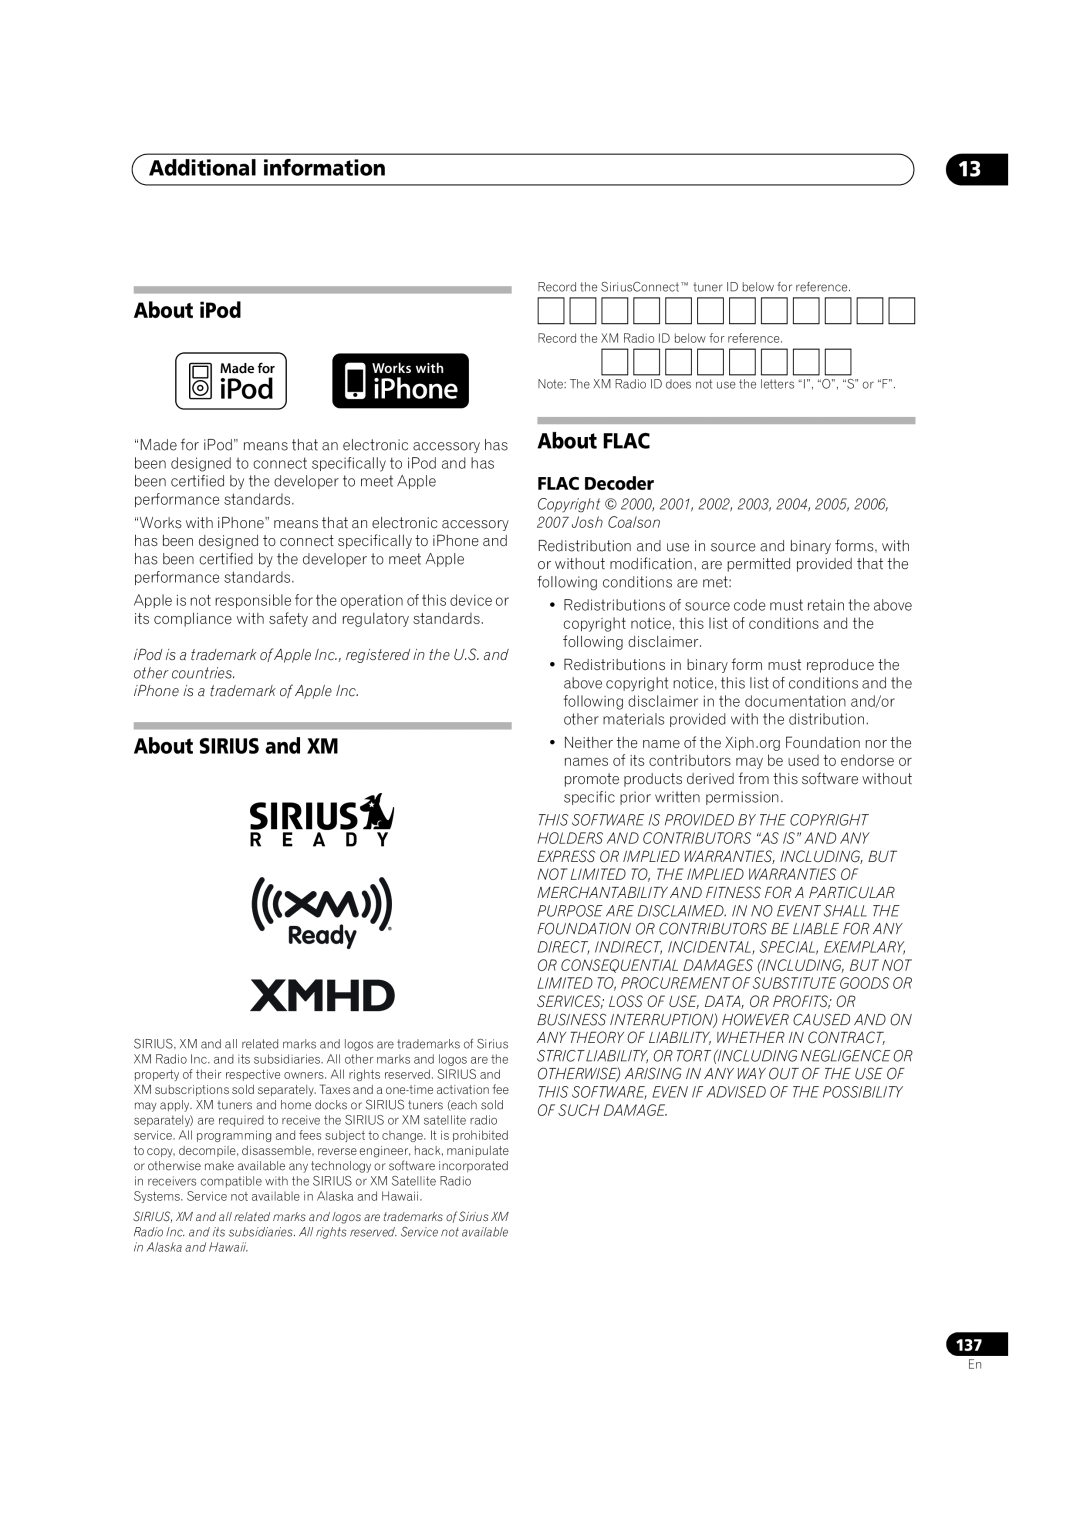 Pioneer SC-35 manual About iPod, About SIRIUS and XM, About FLAC, FLAC Decoder, Additional information 